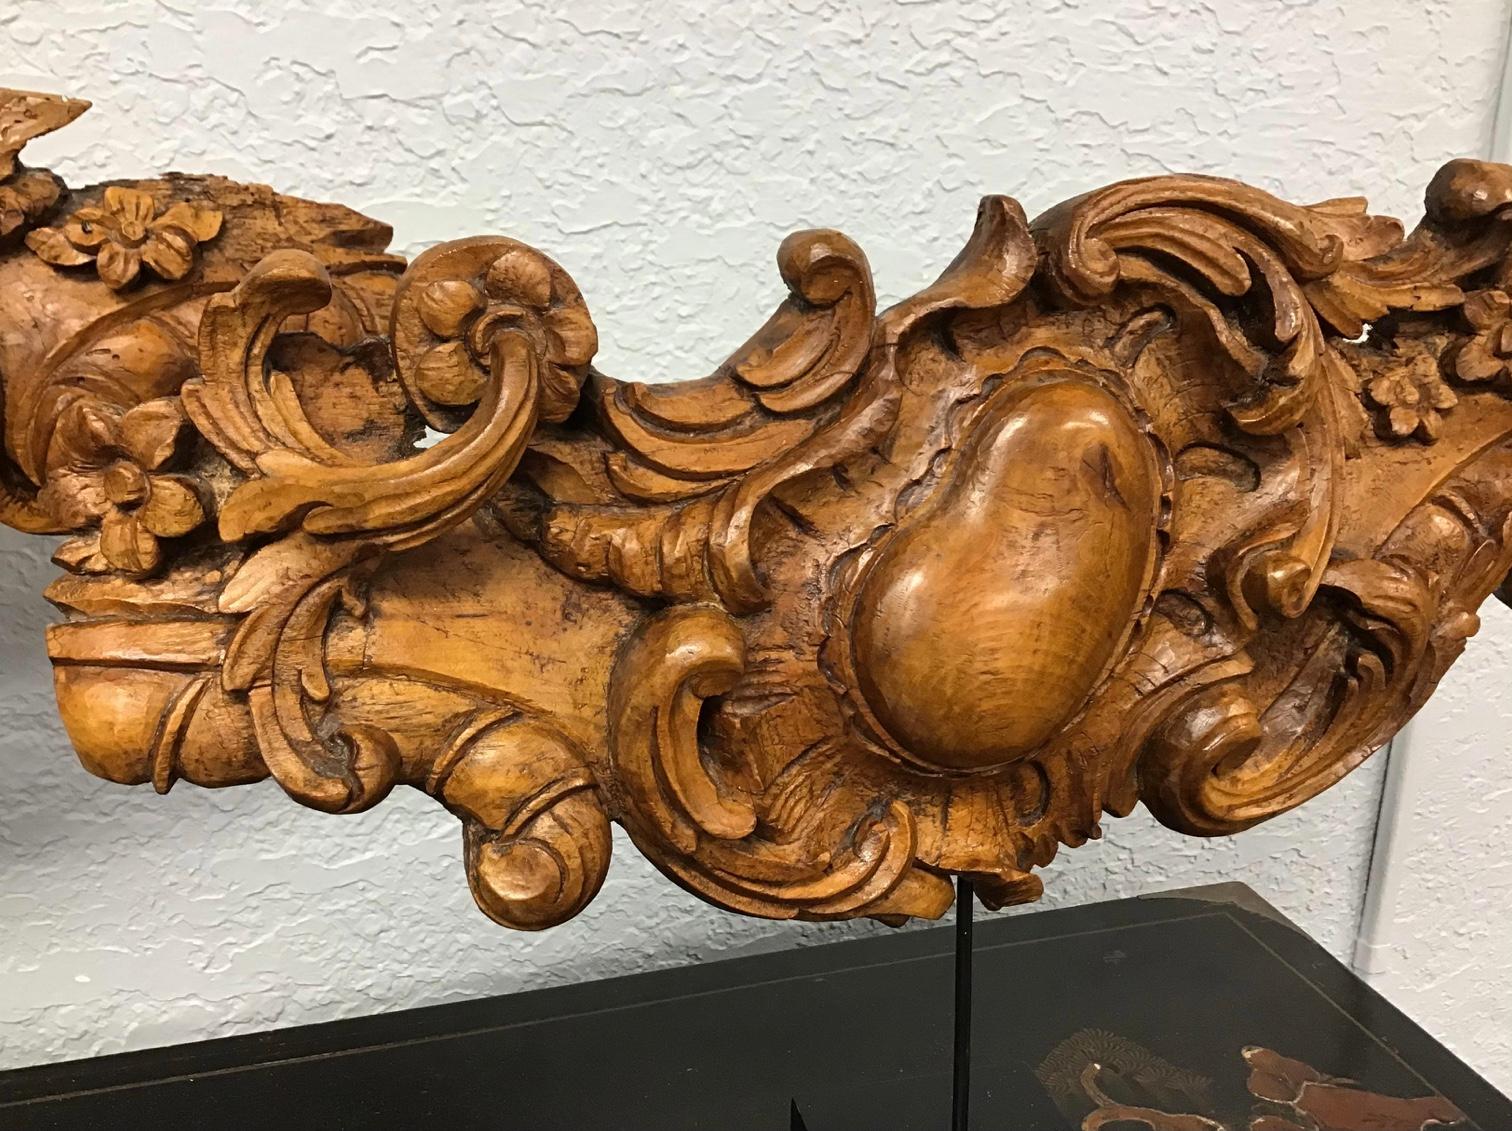 Amazing pair of 18th century carved wood cartouche. Carved with scrolling design and flowers throughout. Mounted on later iron and wood stands. Can be used on the stands on a table or chest or taken off of the stands and hung on the wall.